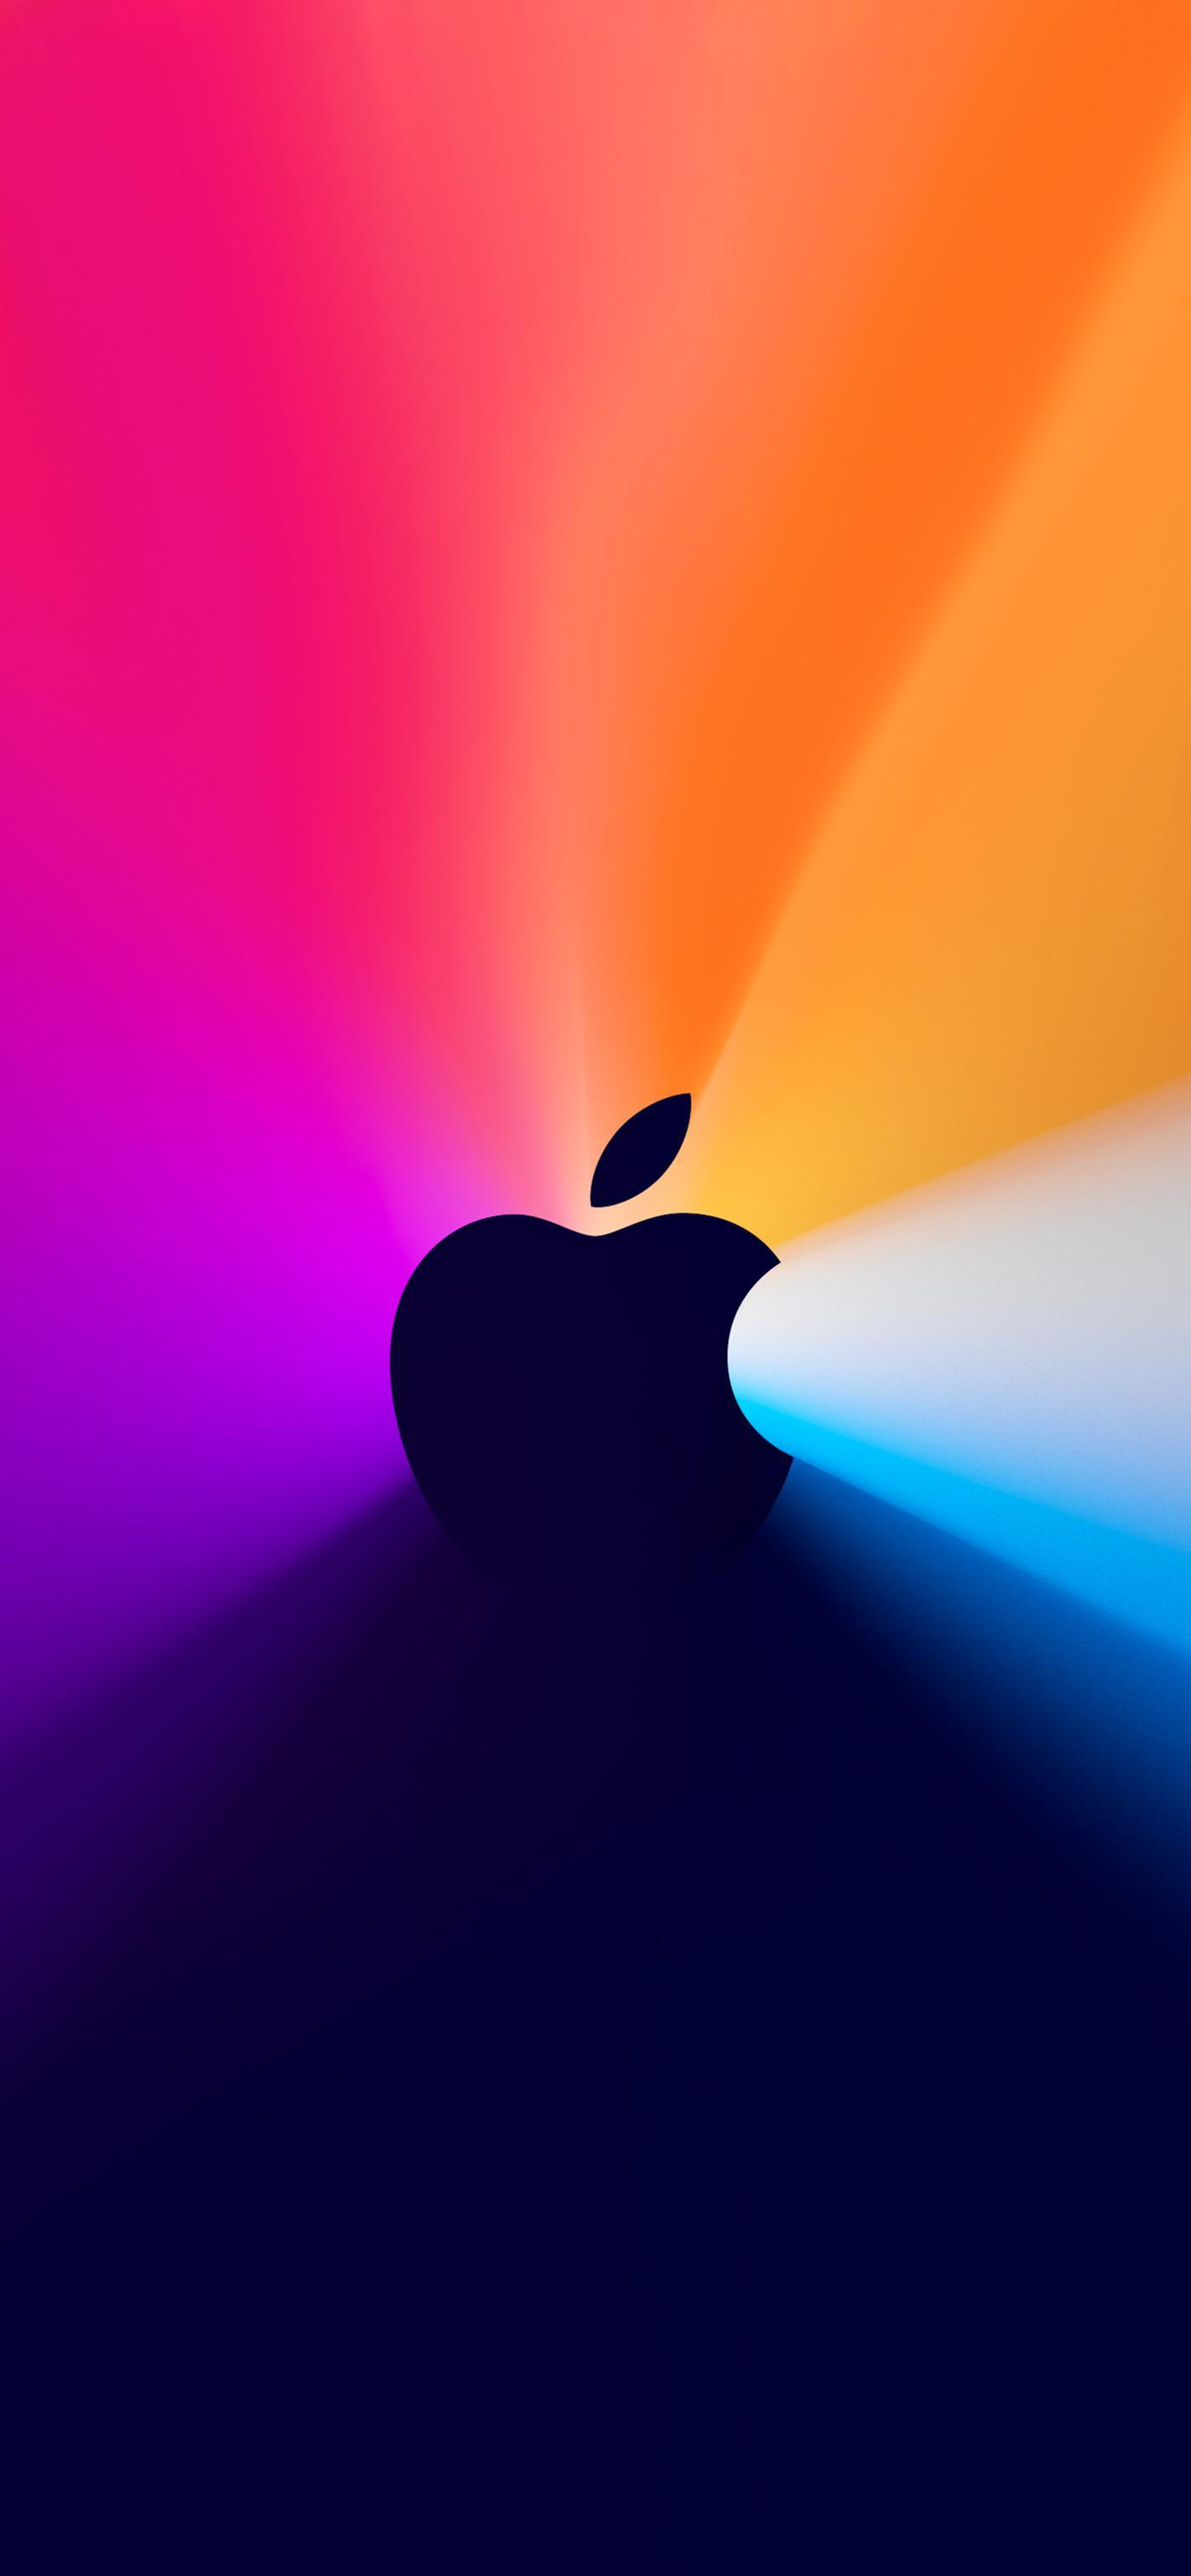 The Last Apple Event Wallpaper In Hq R iPhonewallpaper